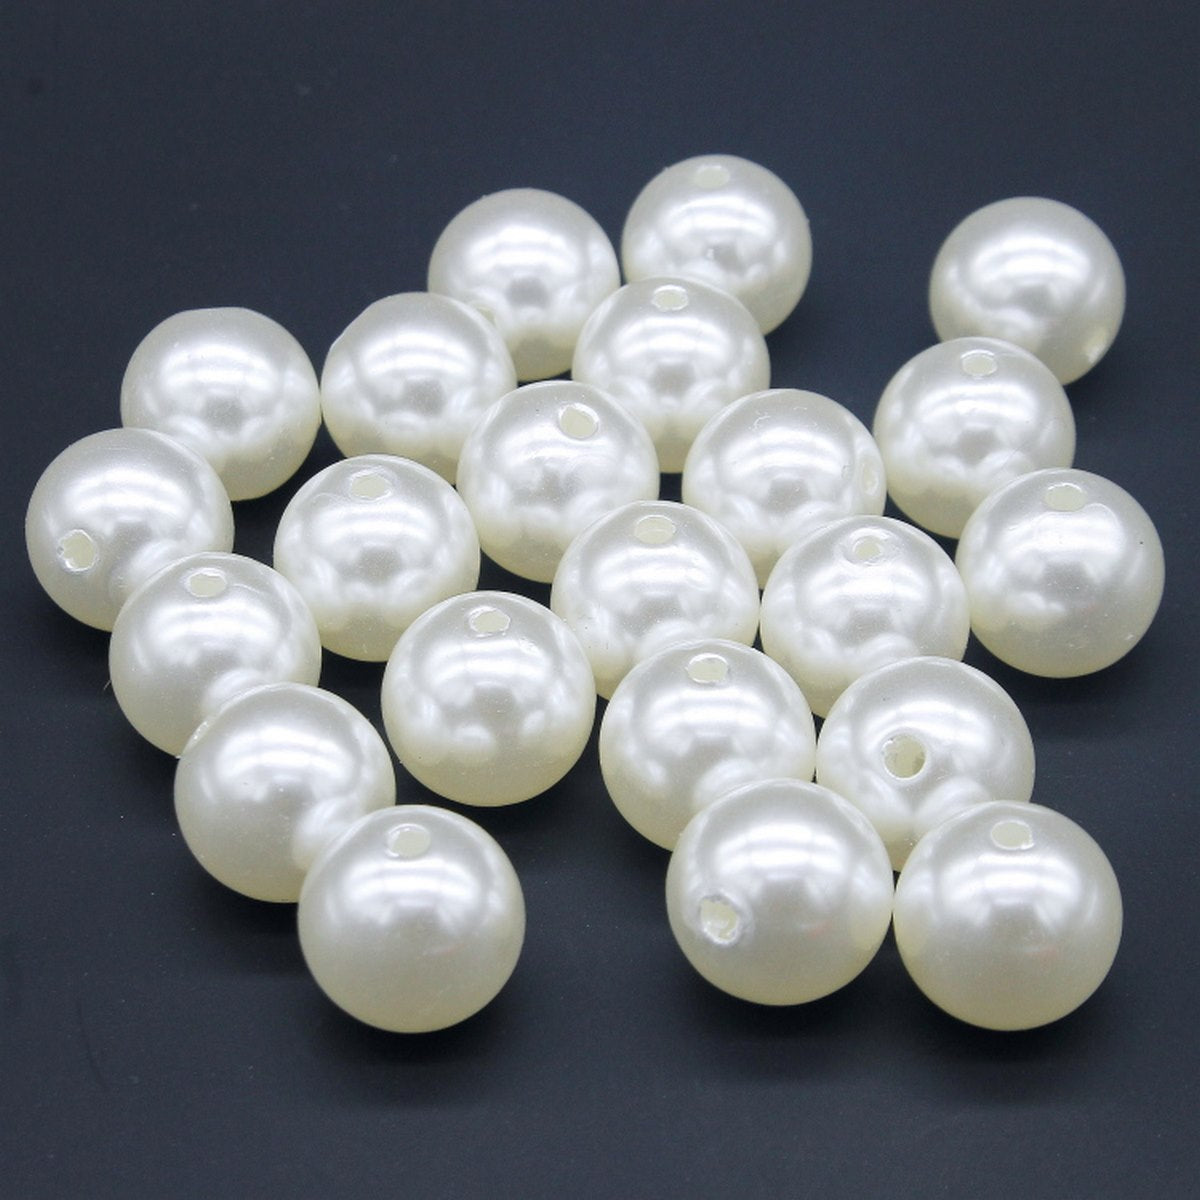 jags-mumbai Craft Accessories Jags Craft Beads Pearl Colour 14mm 25gm CPM-5